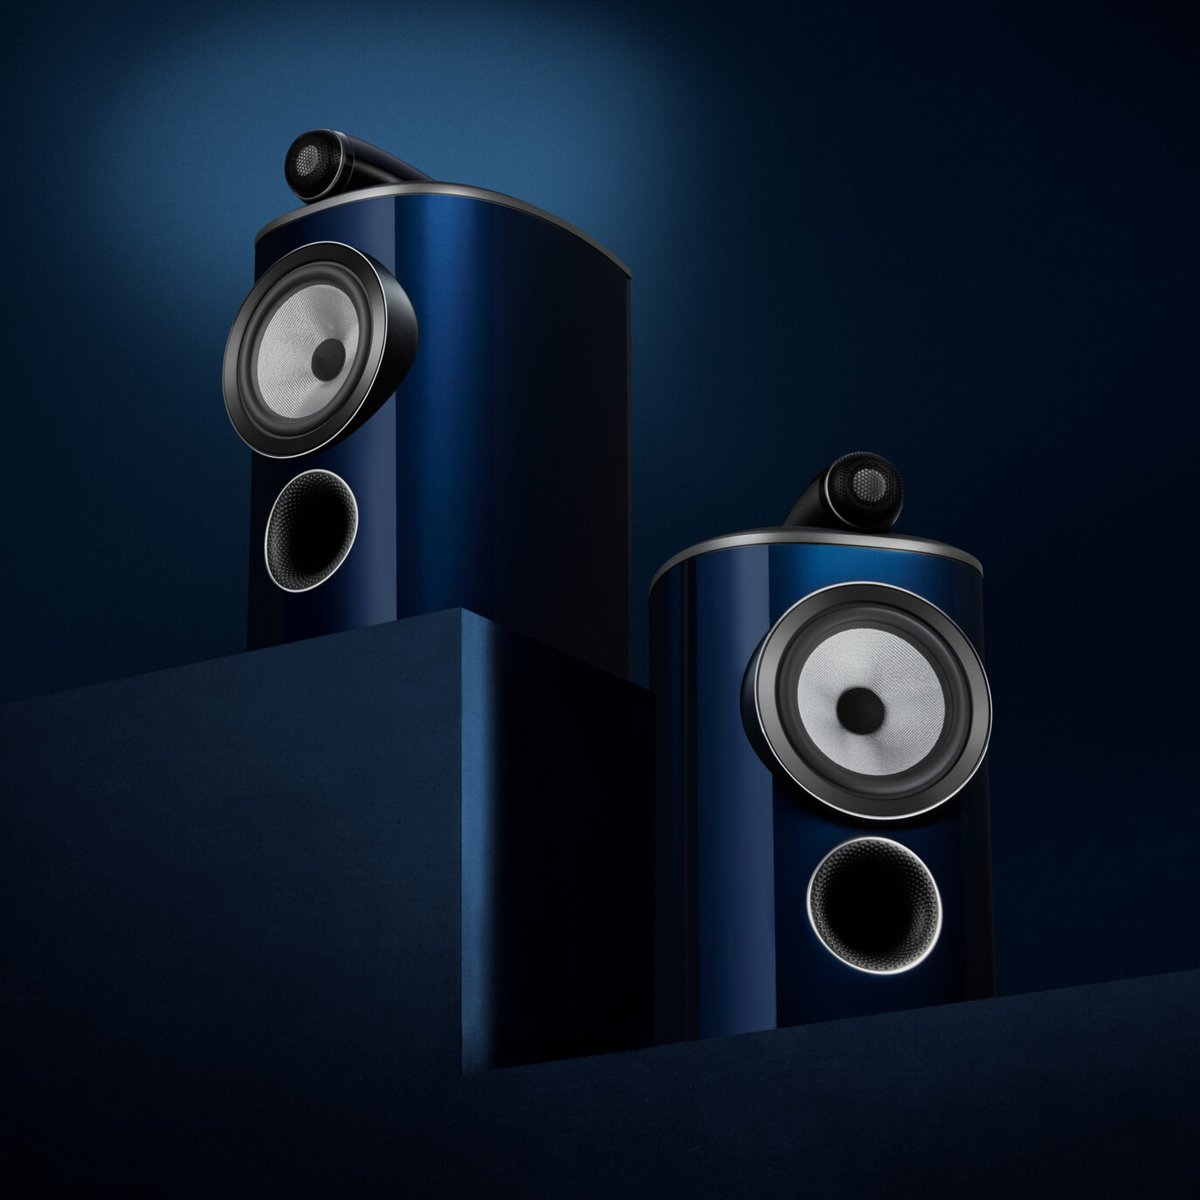 For over 50 years, Bowers & Wilkins has been dedicated to bringing listeners closer to the music they love. 

#BowersWilkins #800SeriesSignature #805D4Signature #HiFiAudio